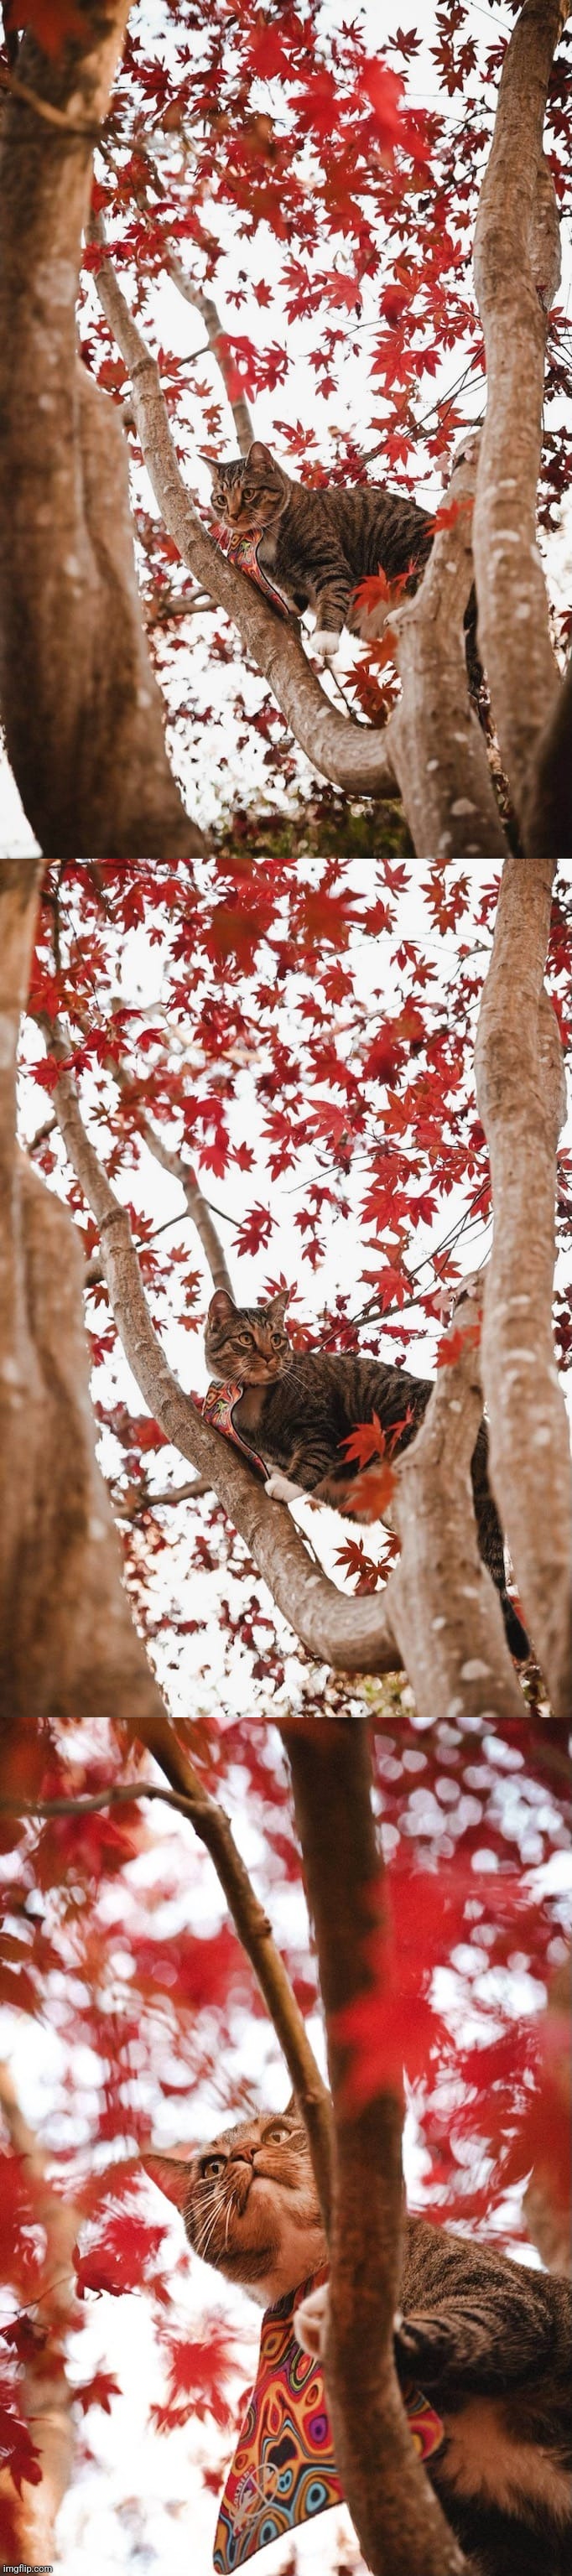 My neighbors cat Boo in a tree | image tagged in photo,cat named boo | made w/ Imgflip meme maker